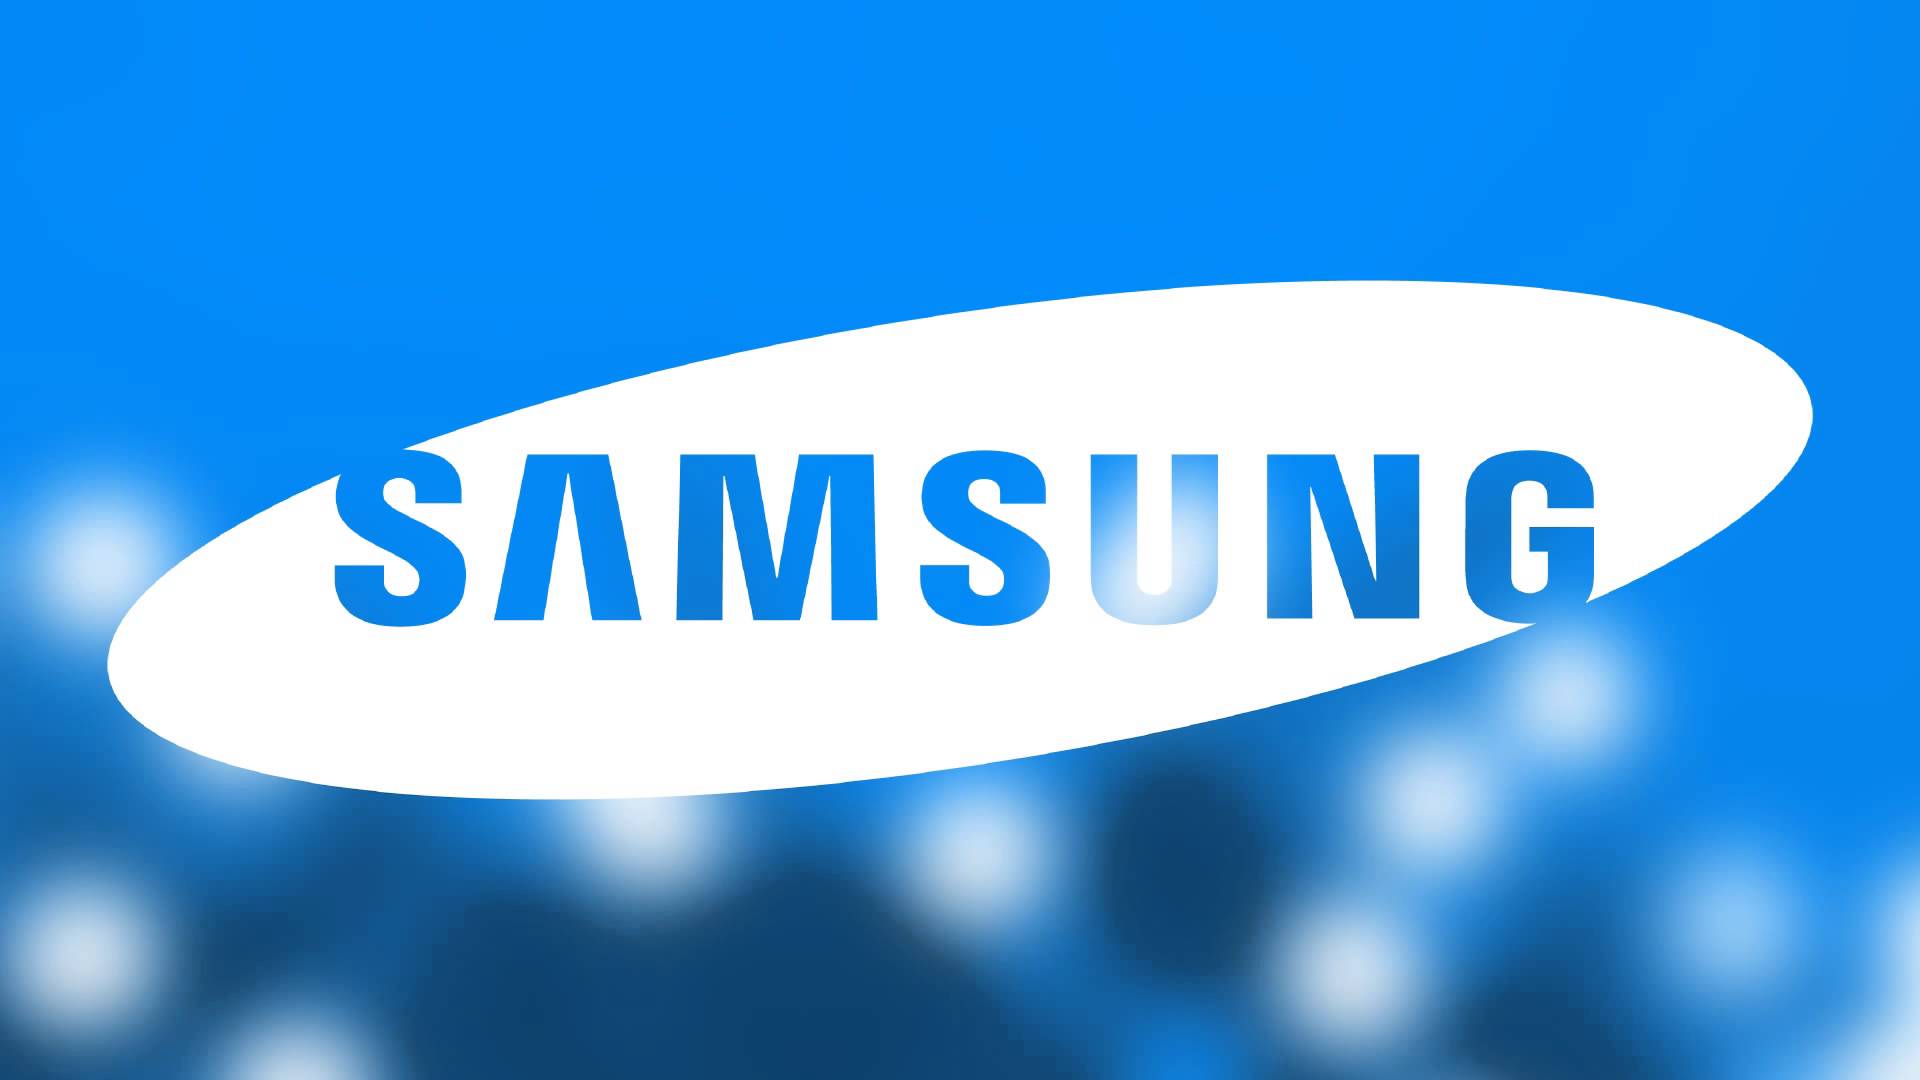 Samsung Company Logo - Samsung Logo | Samsung Logo Design Vector Icon Free Download